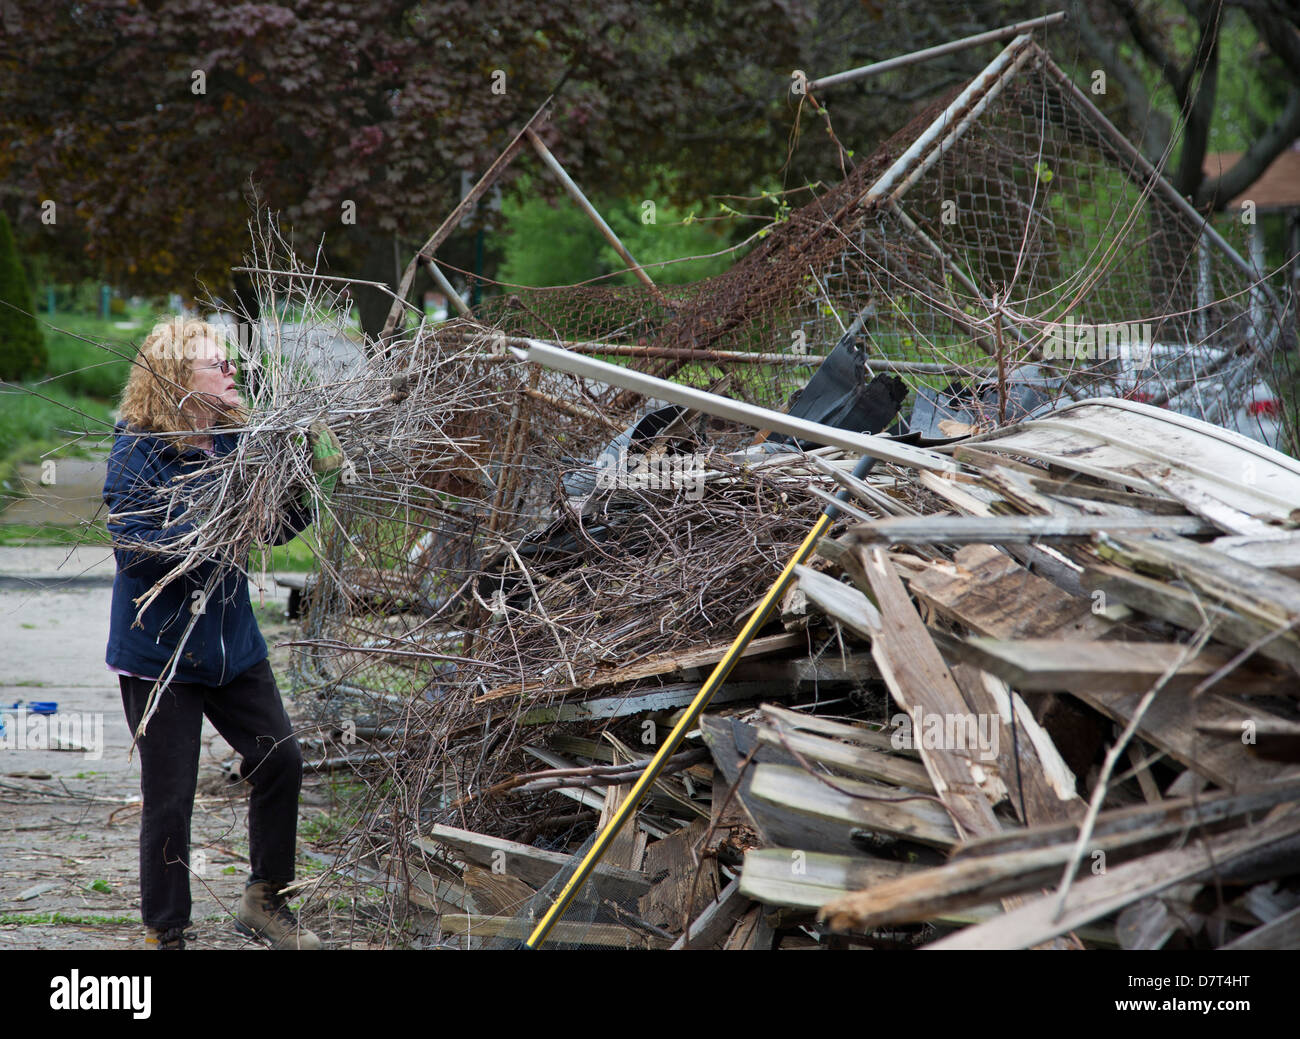 Volunteers from Chrysler Corp. and the Creekside neighborhood clean debris from vacant property in Detroit. Stock Photo